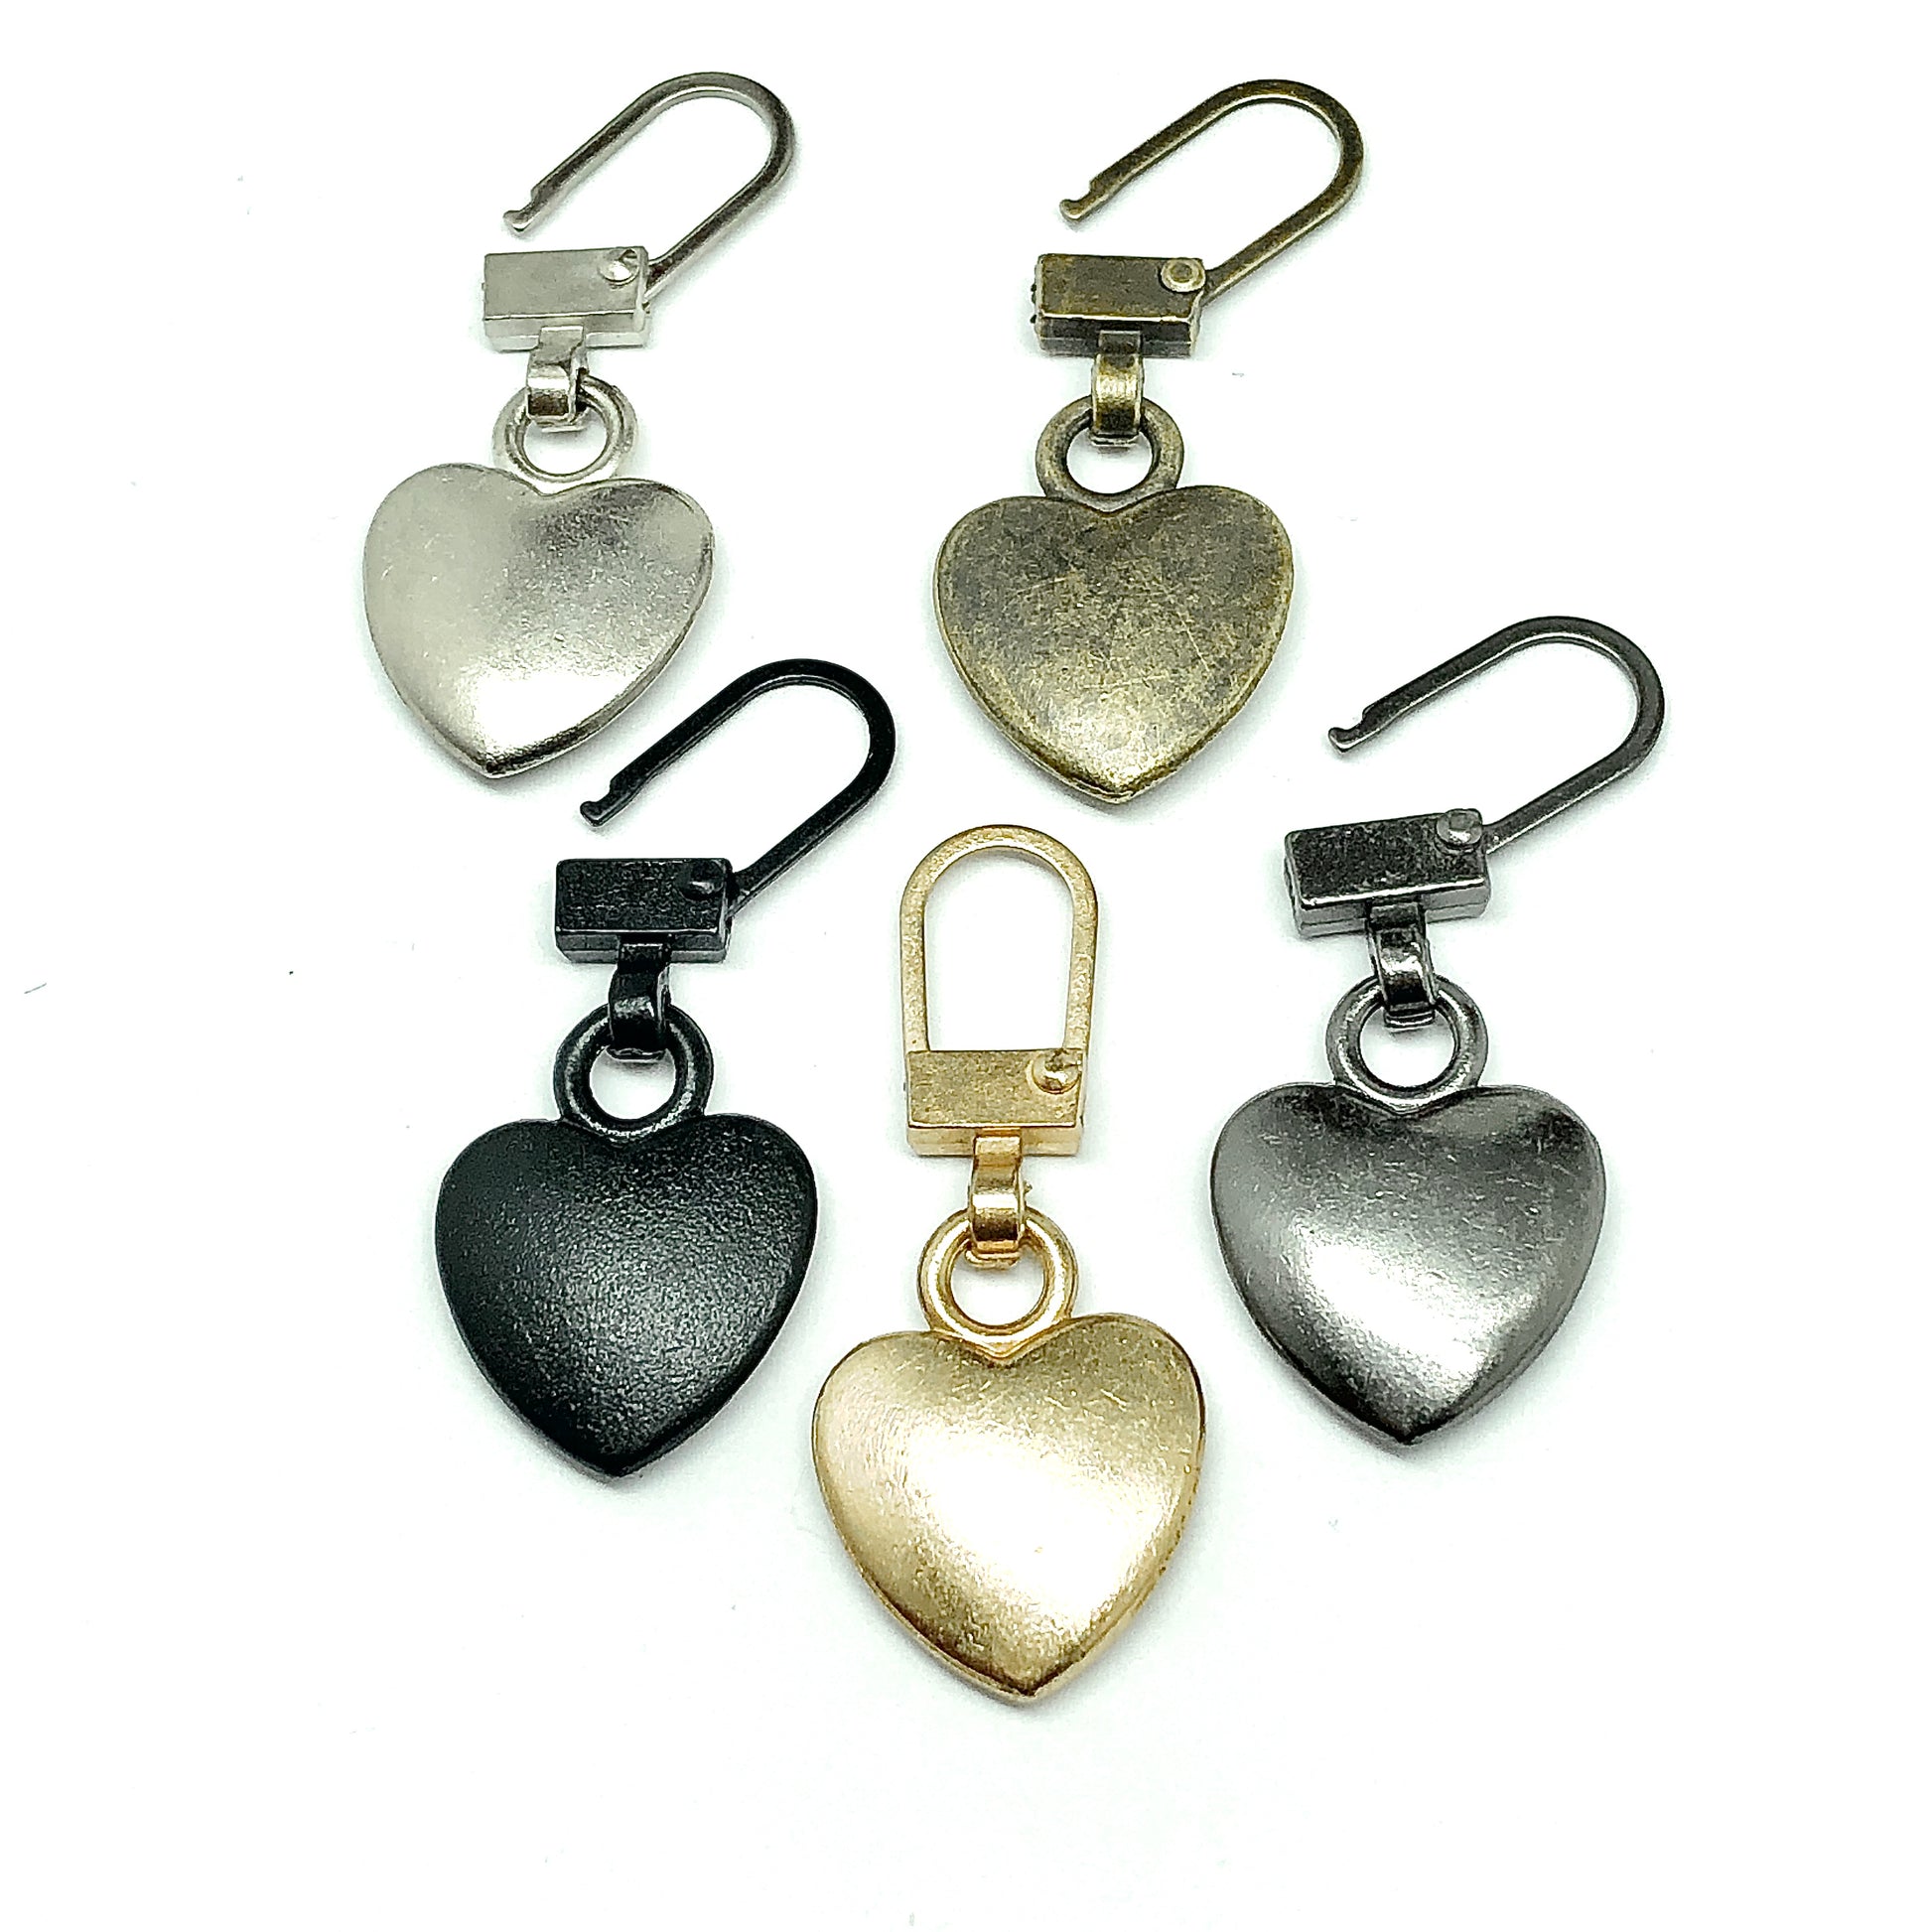 Zipper Repair Charm - Black Heart Zipper Charm or Accessorize anything it can clip onto!